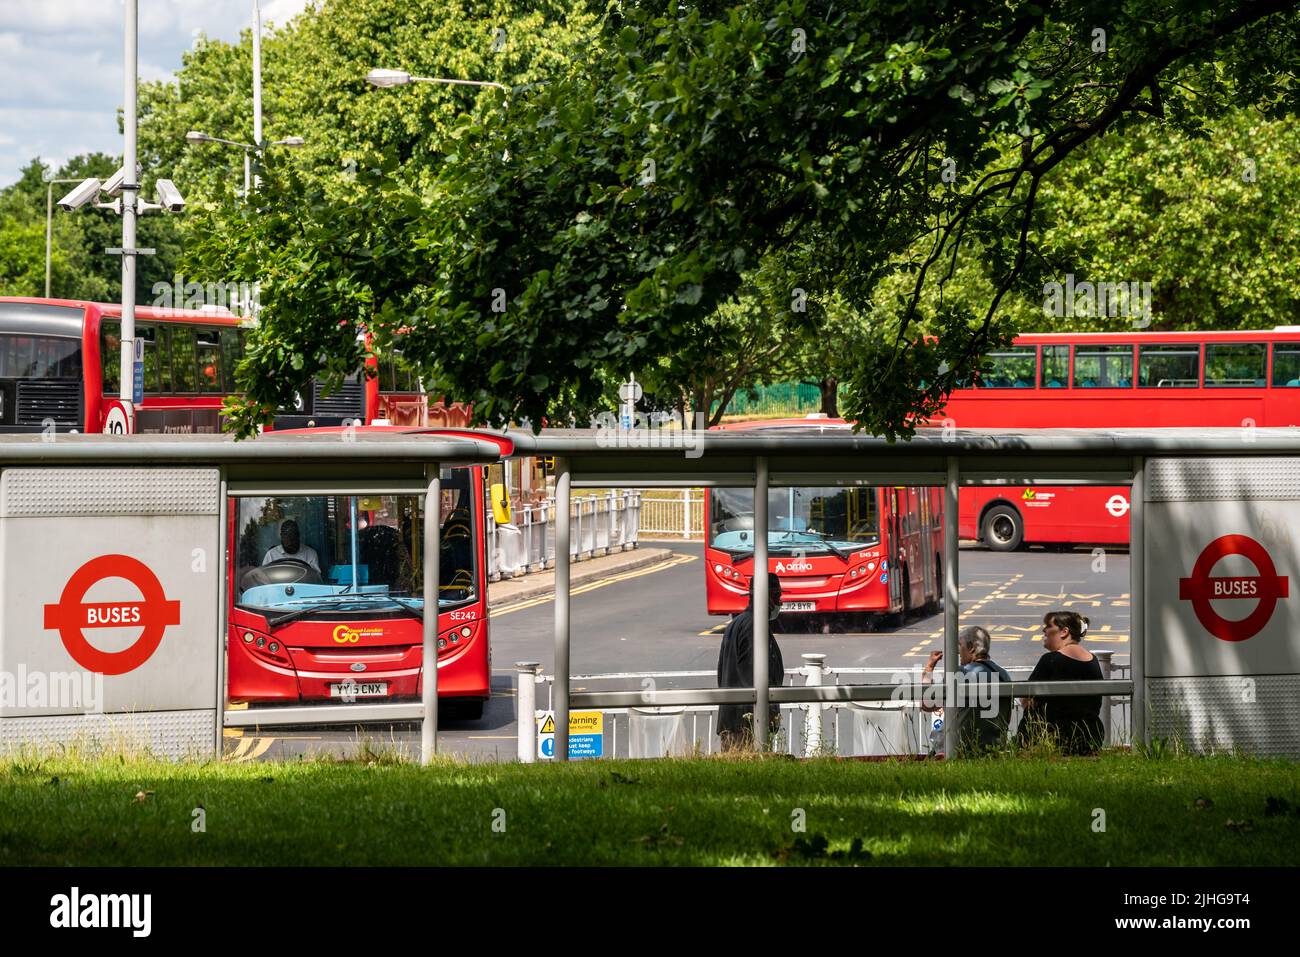 London, UK - June 2020 : People commuting waiting for the buses departing from the Crystal Palace bus station on a busy London Street in summer Stock Photo